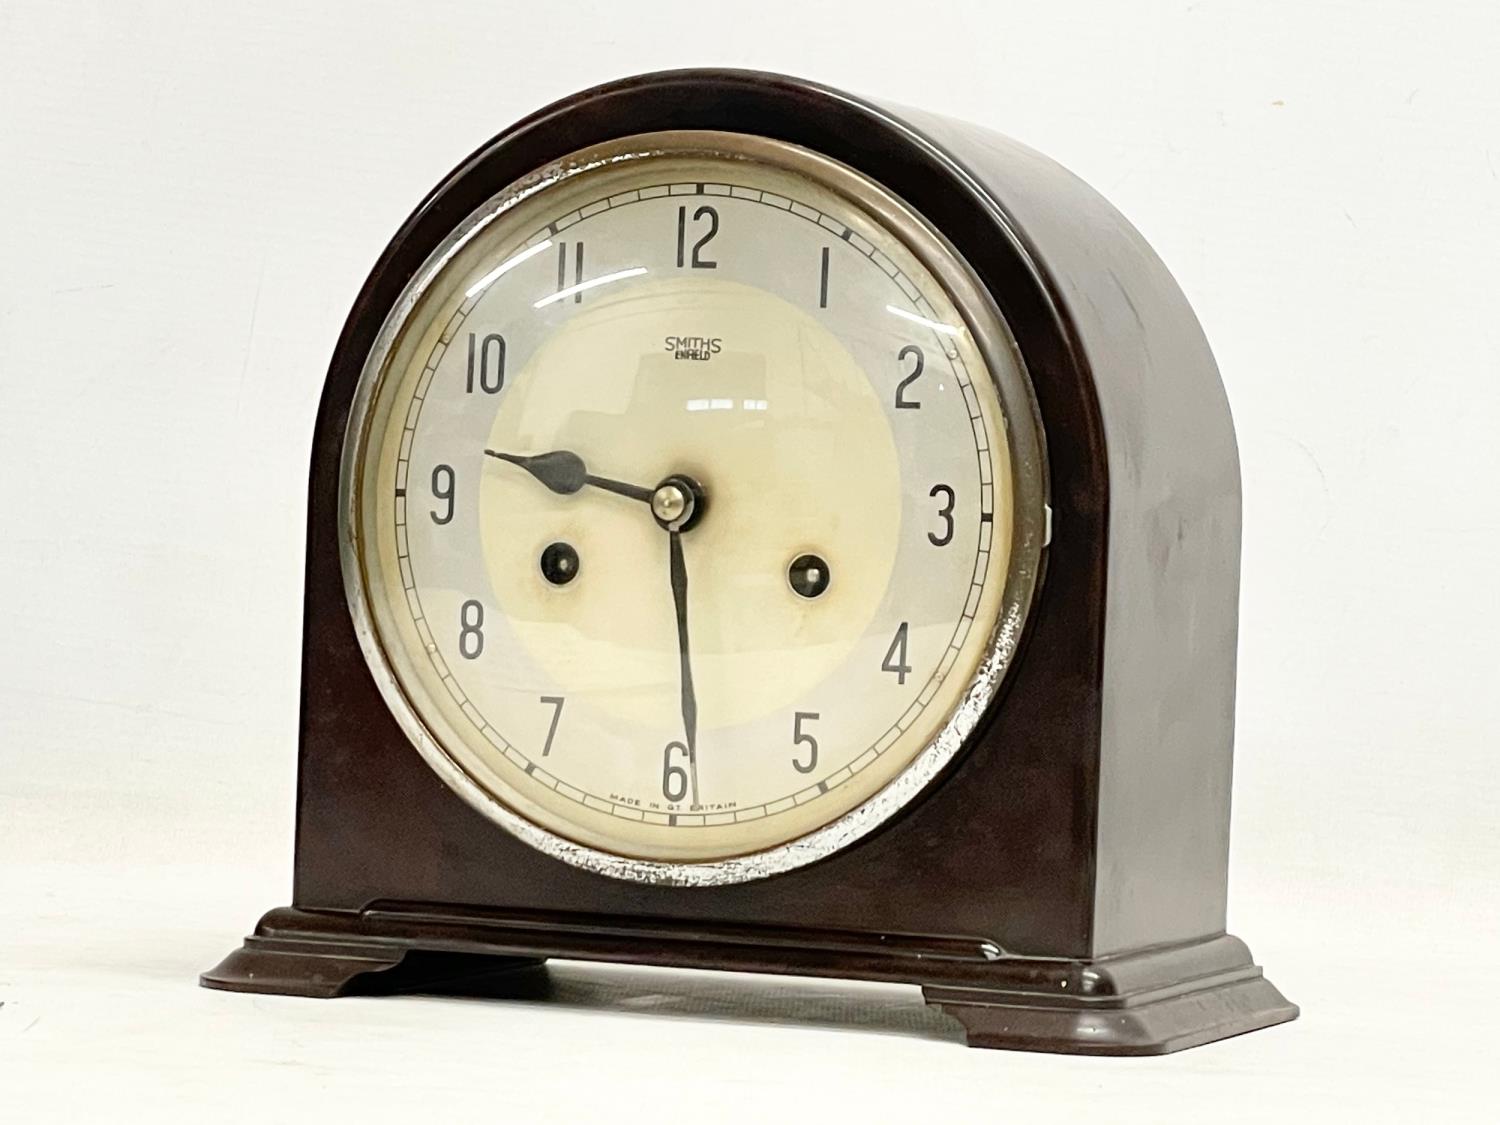 A vintage Art Deco Bakelite mantle clock by Smiths Enfield. With key and pendulum. 22x12x20cm